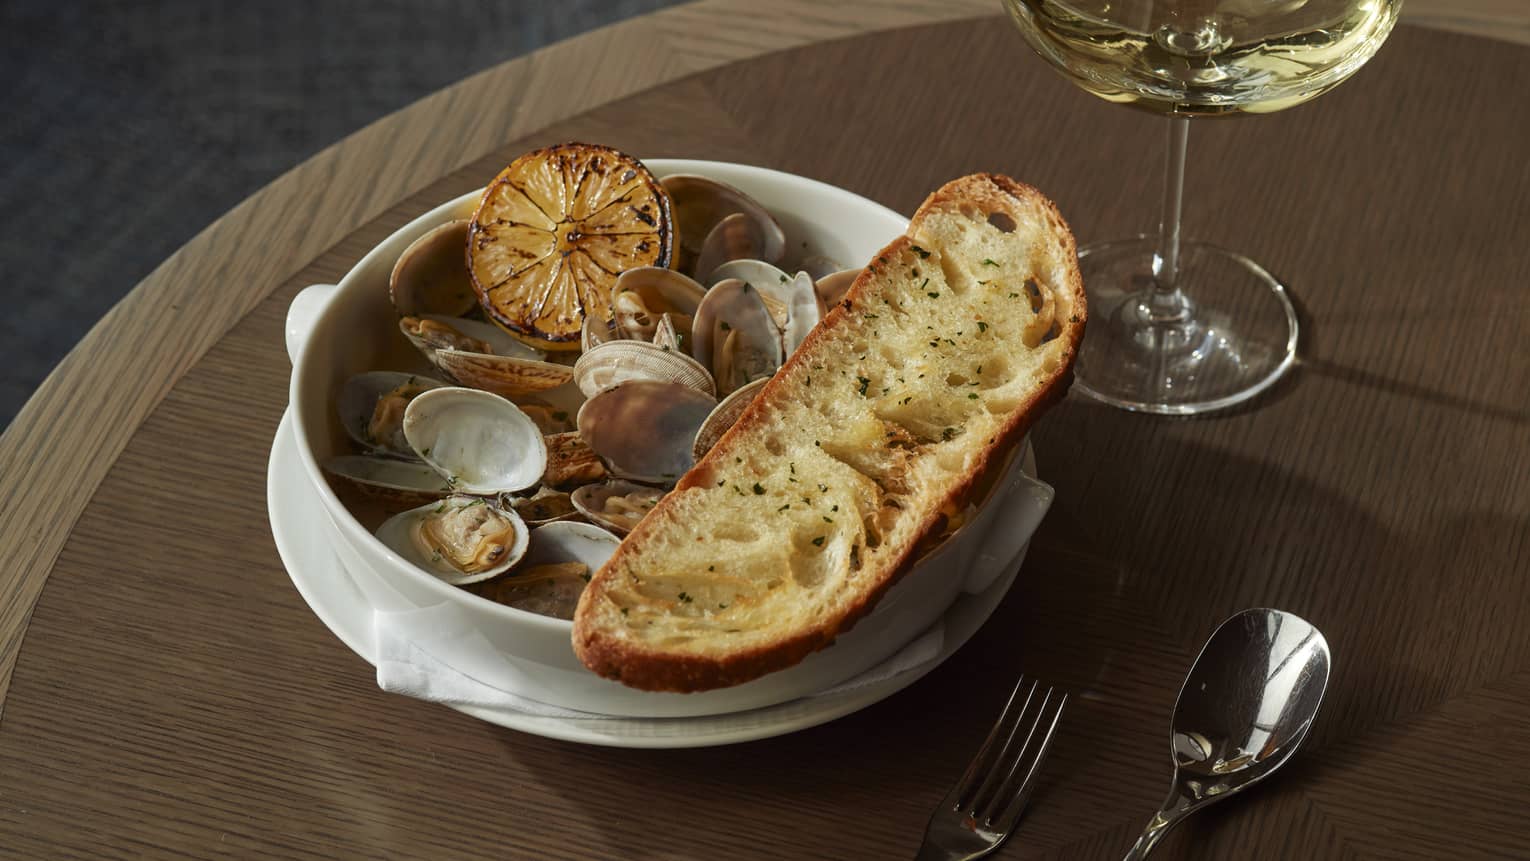 Closeup shot of whole clams in white Corningware bowl, garnished with charred lemon half and rustic slice of bread, glass of white whine nearby